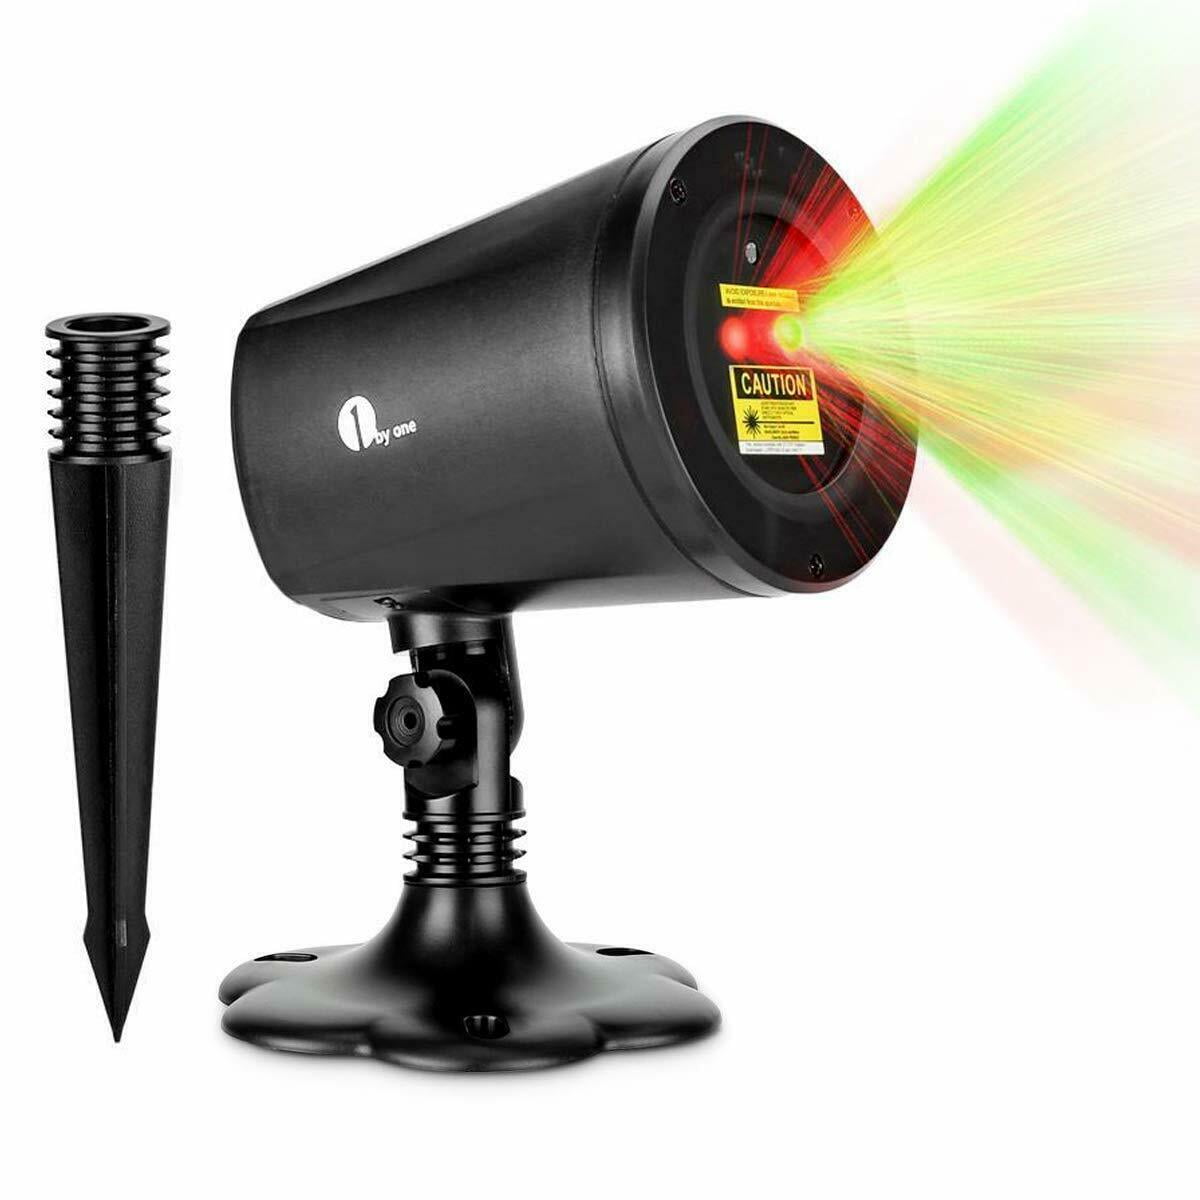 Waterproof Laser Light LED Projector Red+Green Star Outdoor Christmas Lamp 3.4m 